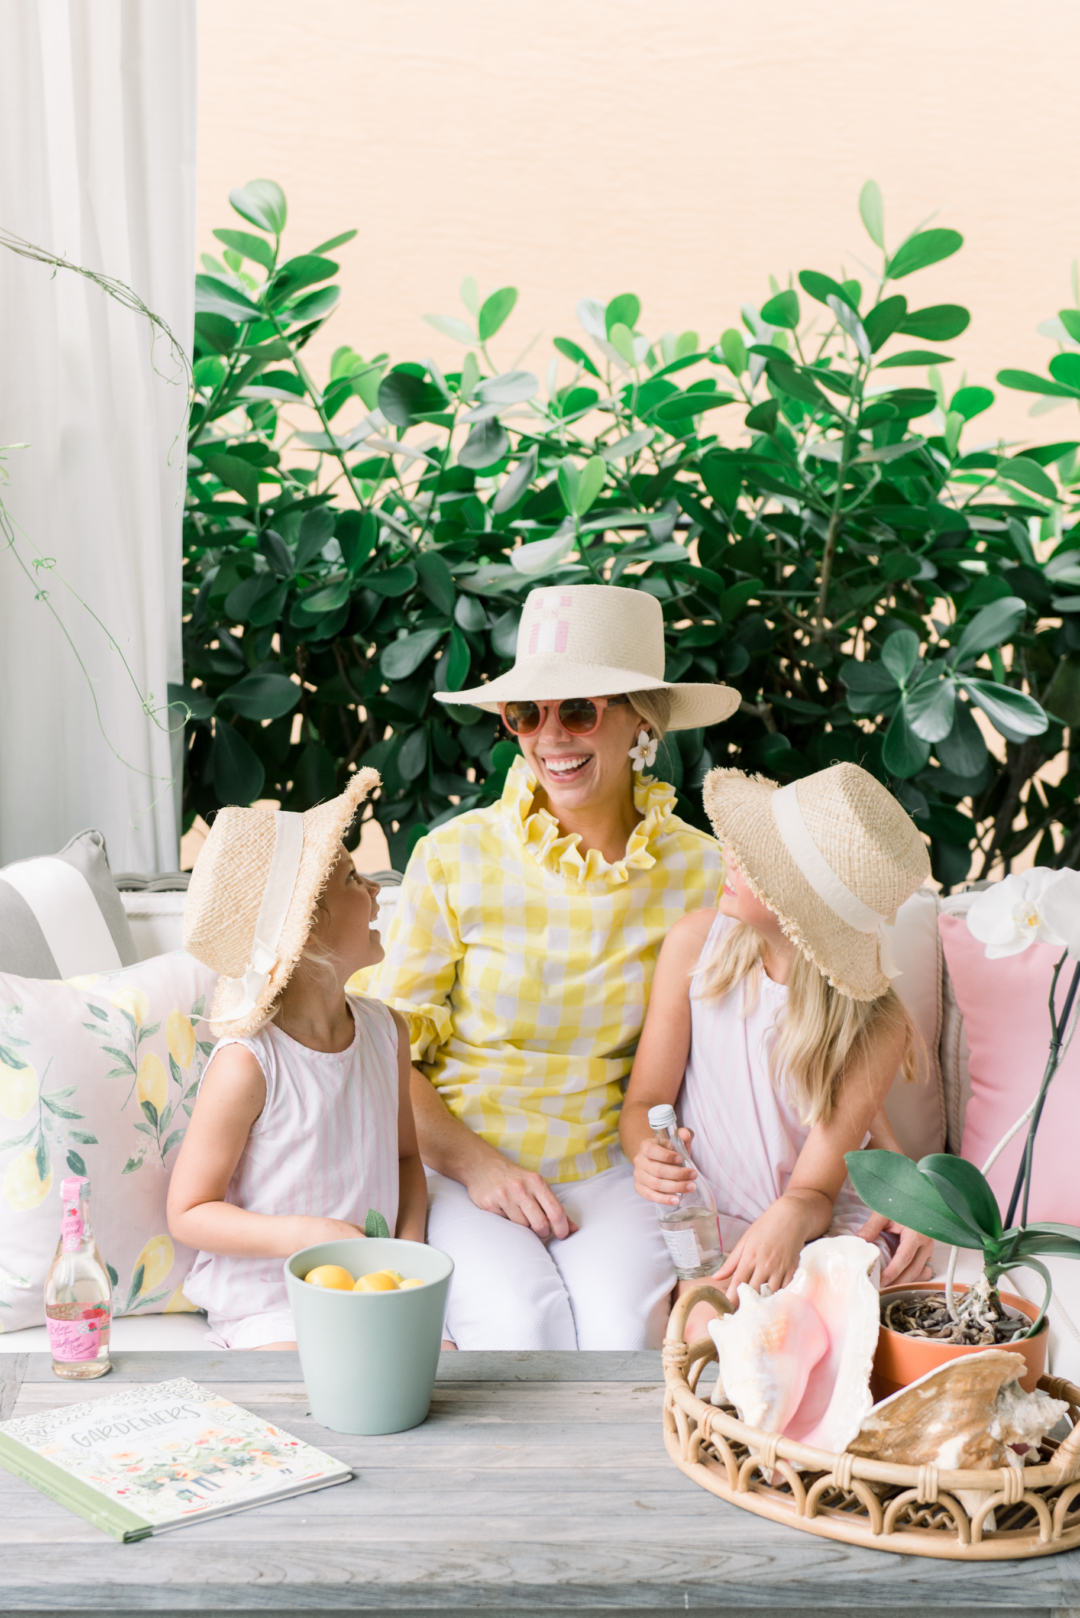 Home: Palm Beach Lately featuring Brooke and Lou's Blush Lemon Pillows